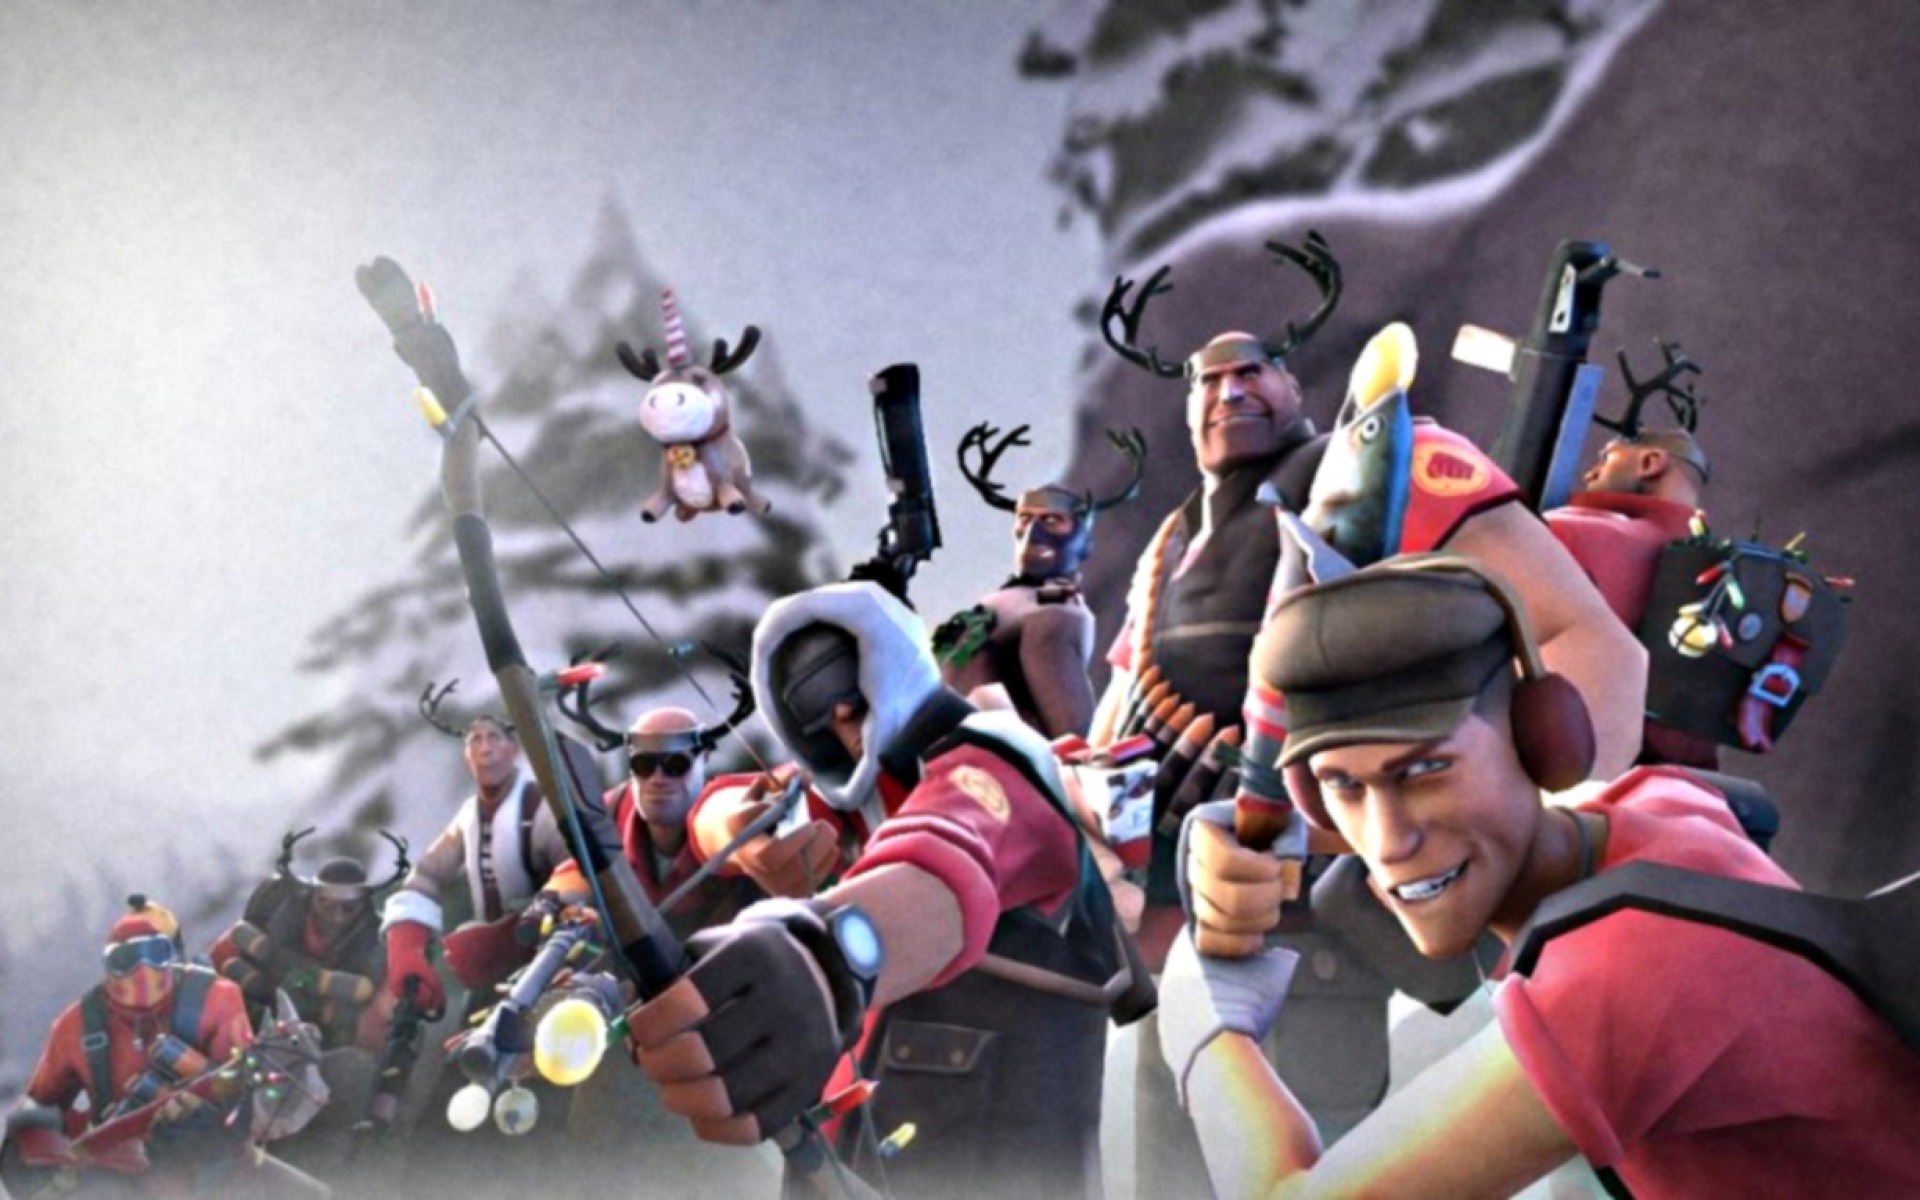 team fortress 2 download backgrounds